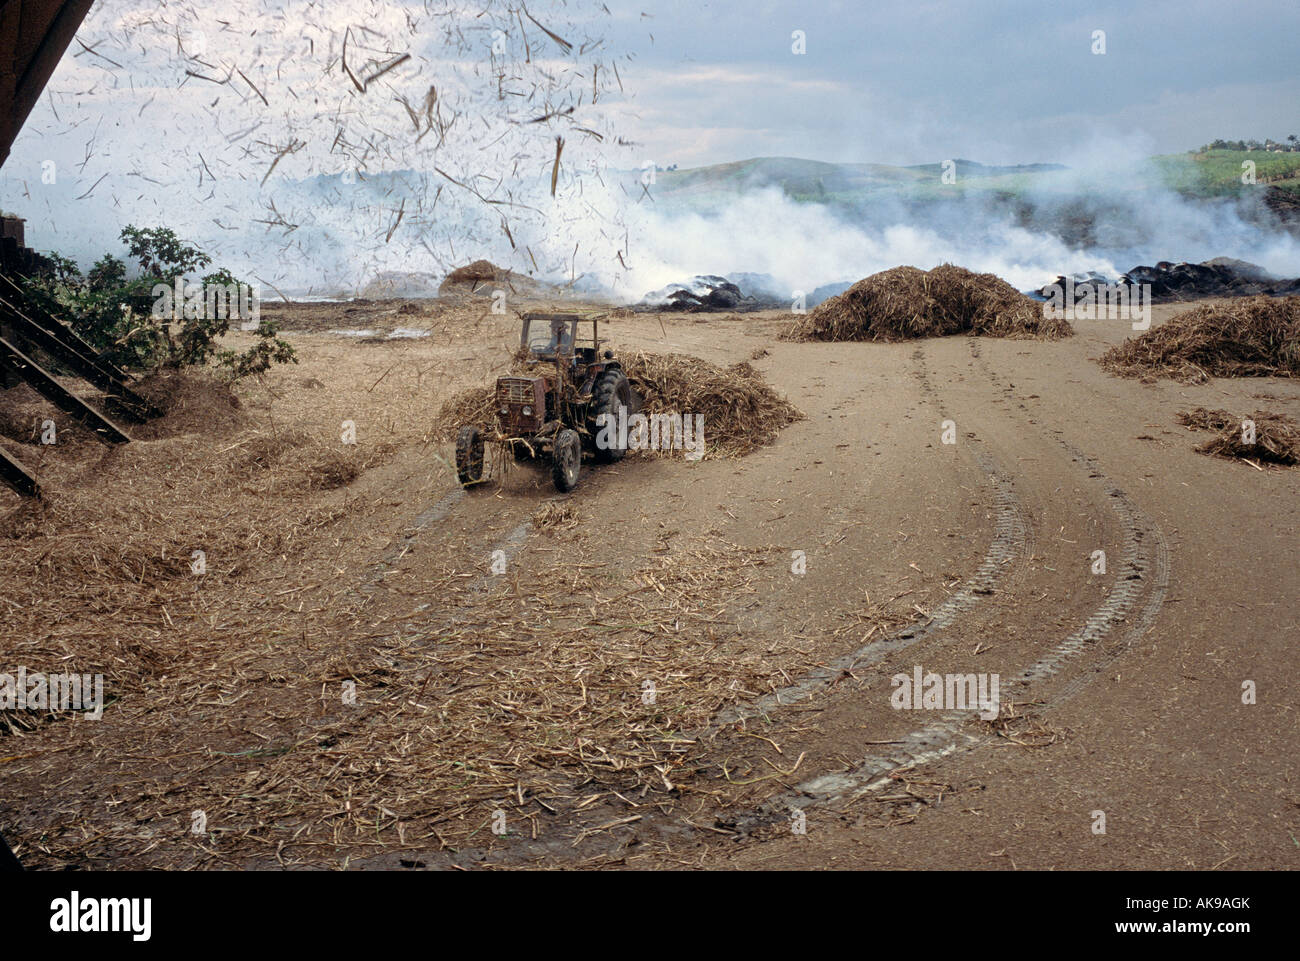 Tractor carrying sugar cane husks to be burned at a sugar mill in Julio Reyes the Province of Matanzas Cuba Stock Photo